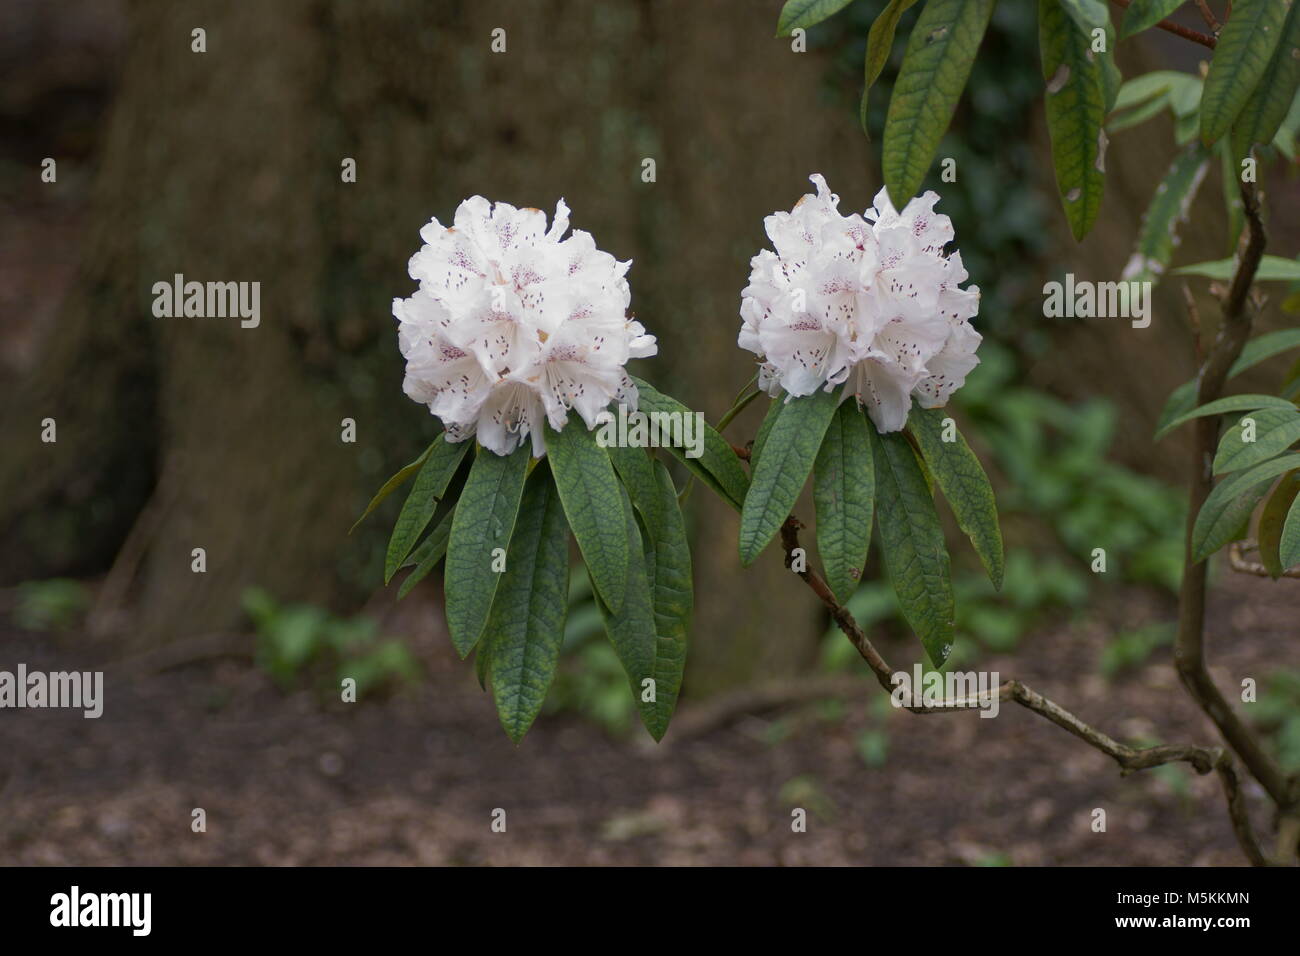 Rhododendron hybrid Stock Photo